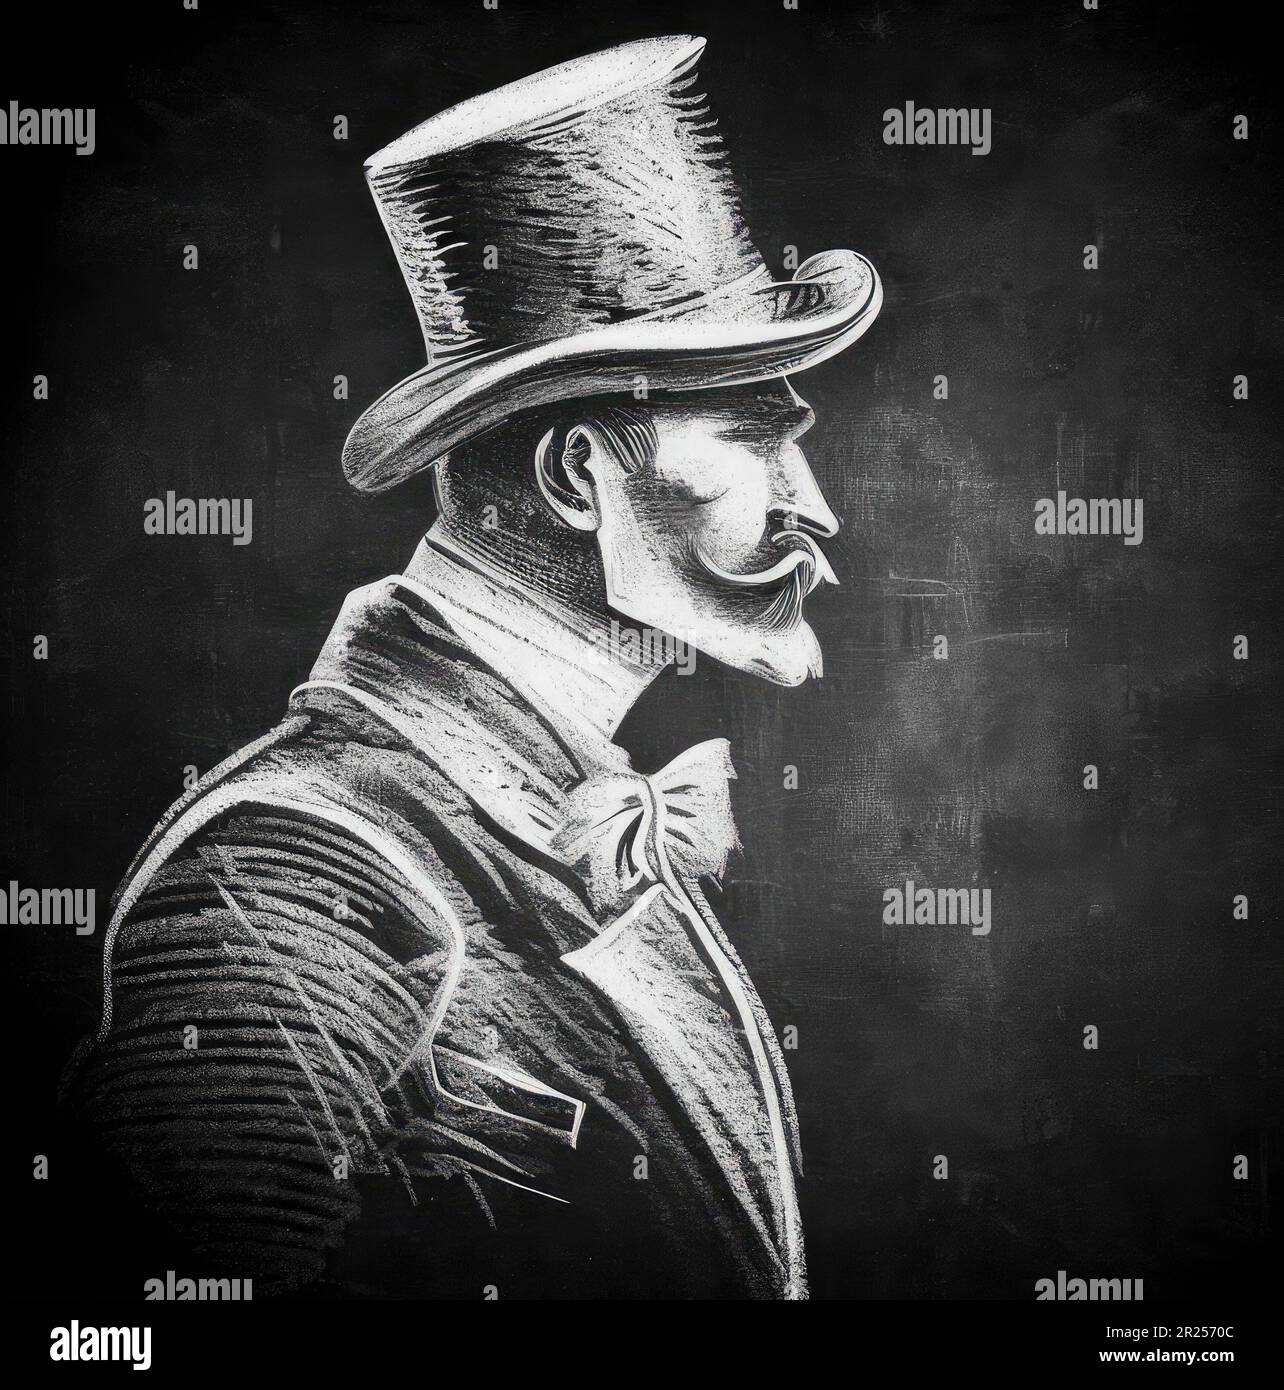 A vintage style abstract chalk sketch of a Victorian gentleman in a top hat, on a chalkboard background Stock Photo